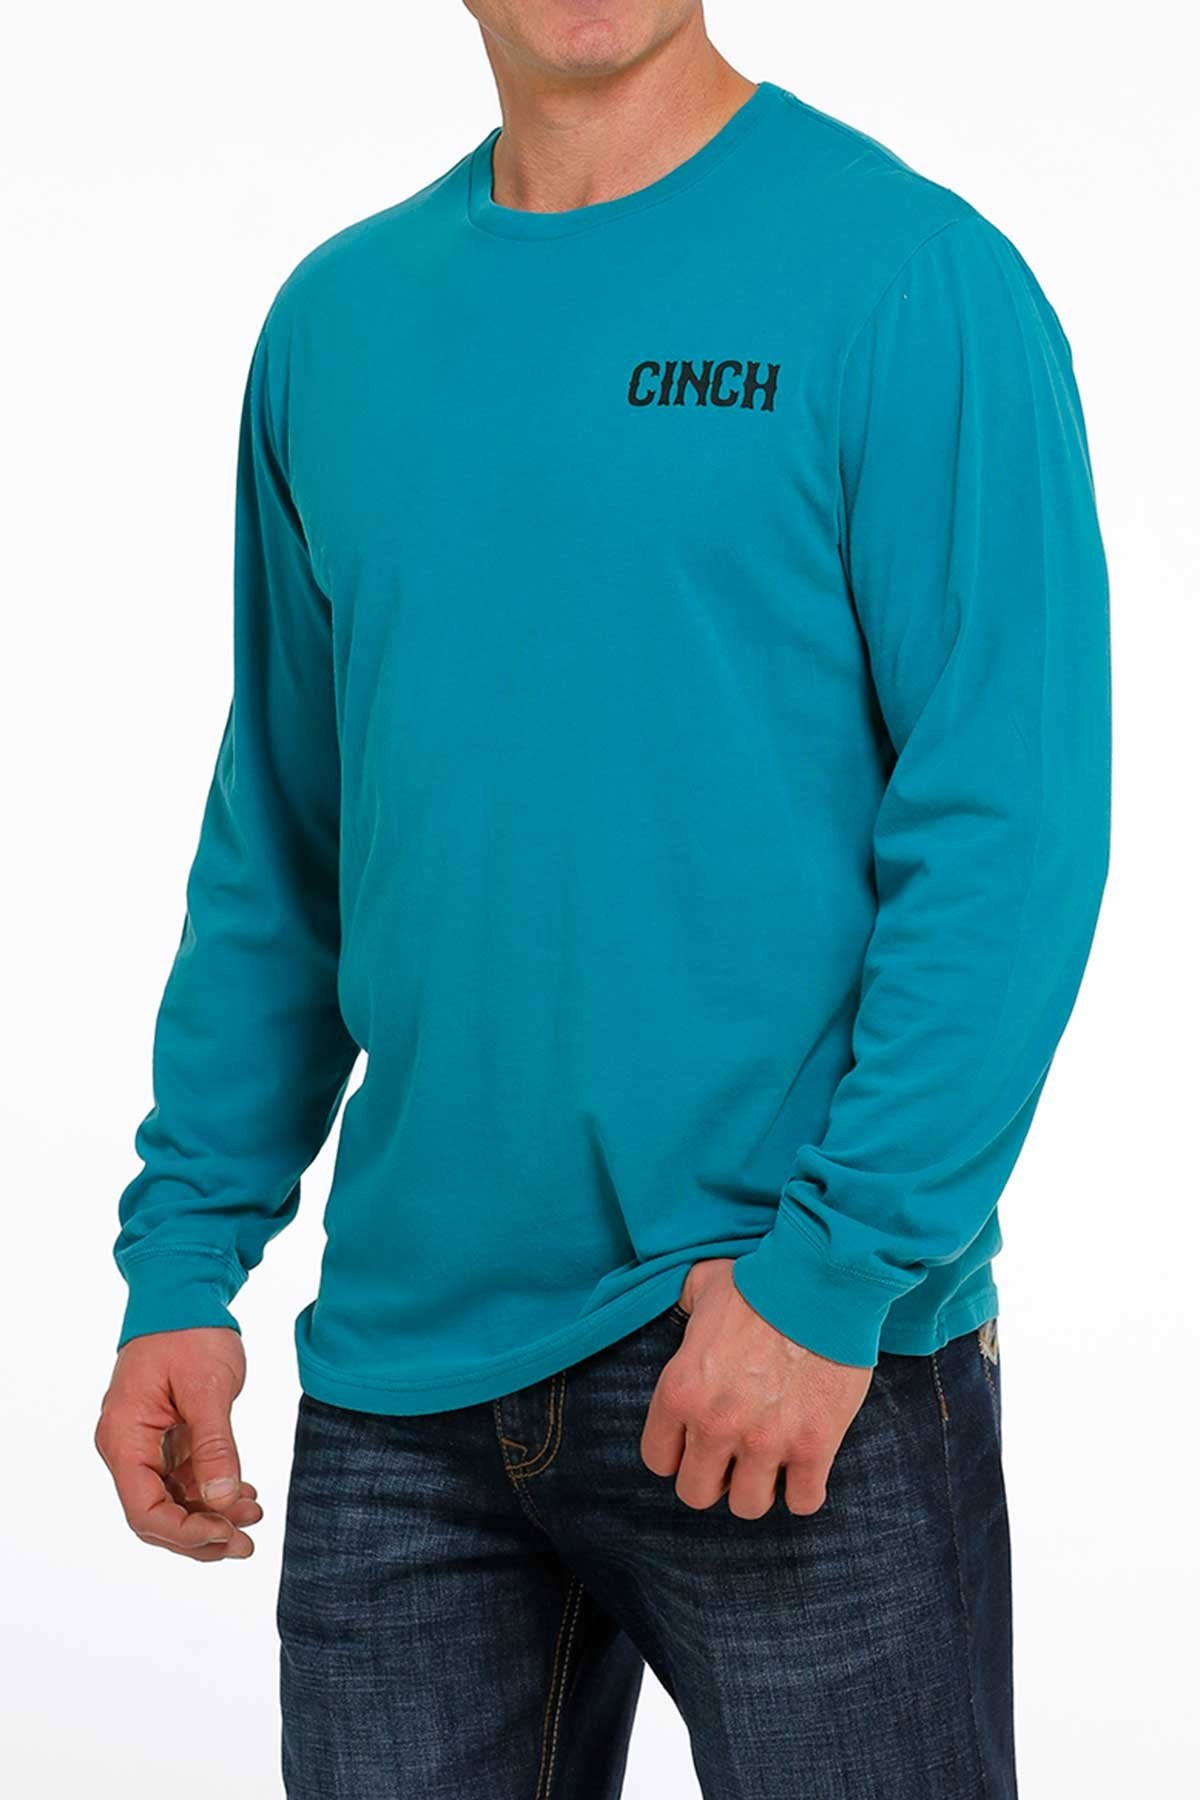 Cinch Denim Co. "Lead This Life" Long Sleeve Graphic T-Shirt - Teal